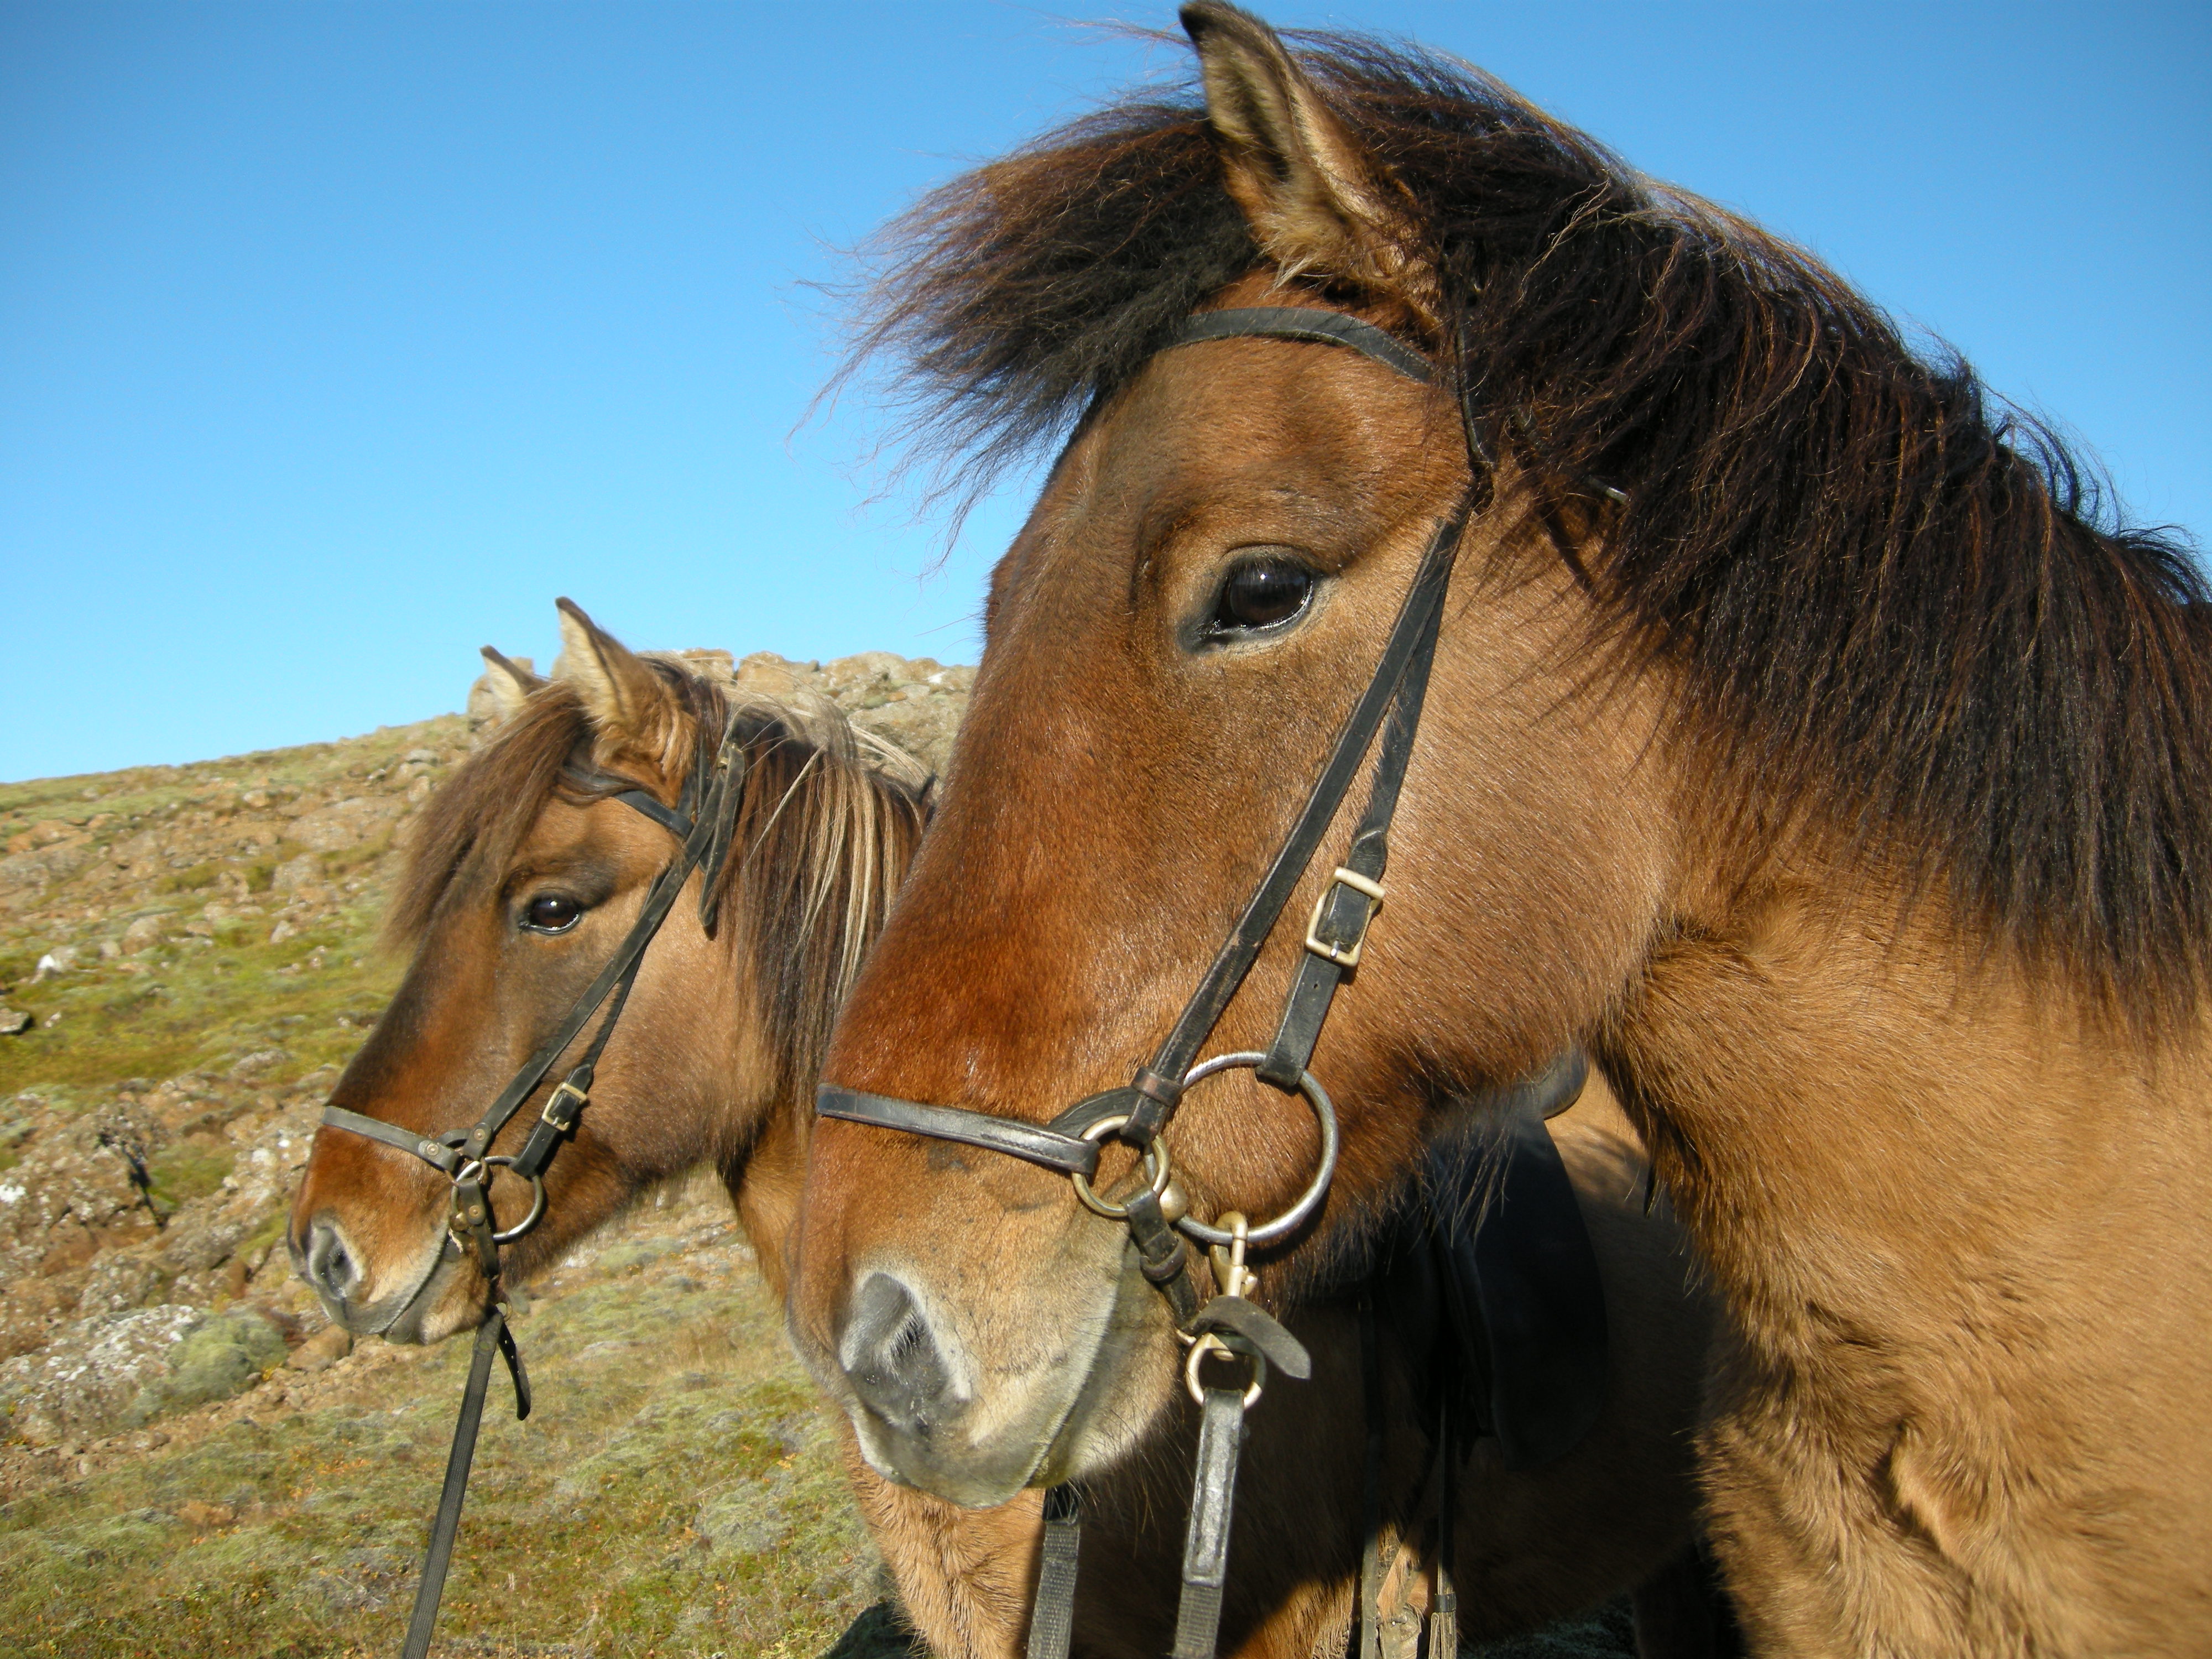 The Icelandic horse is known across the world for being a very friendly animal.